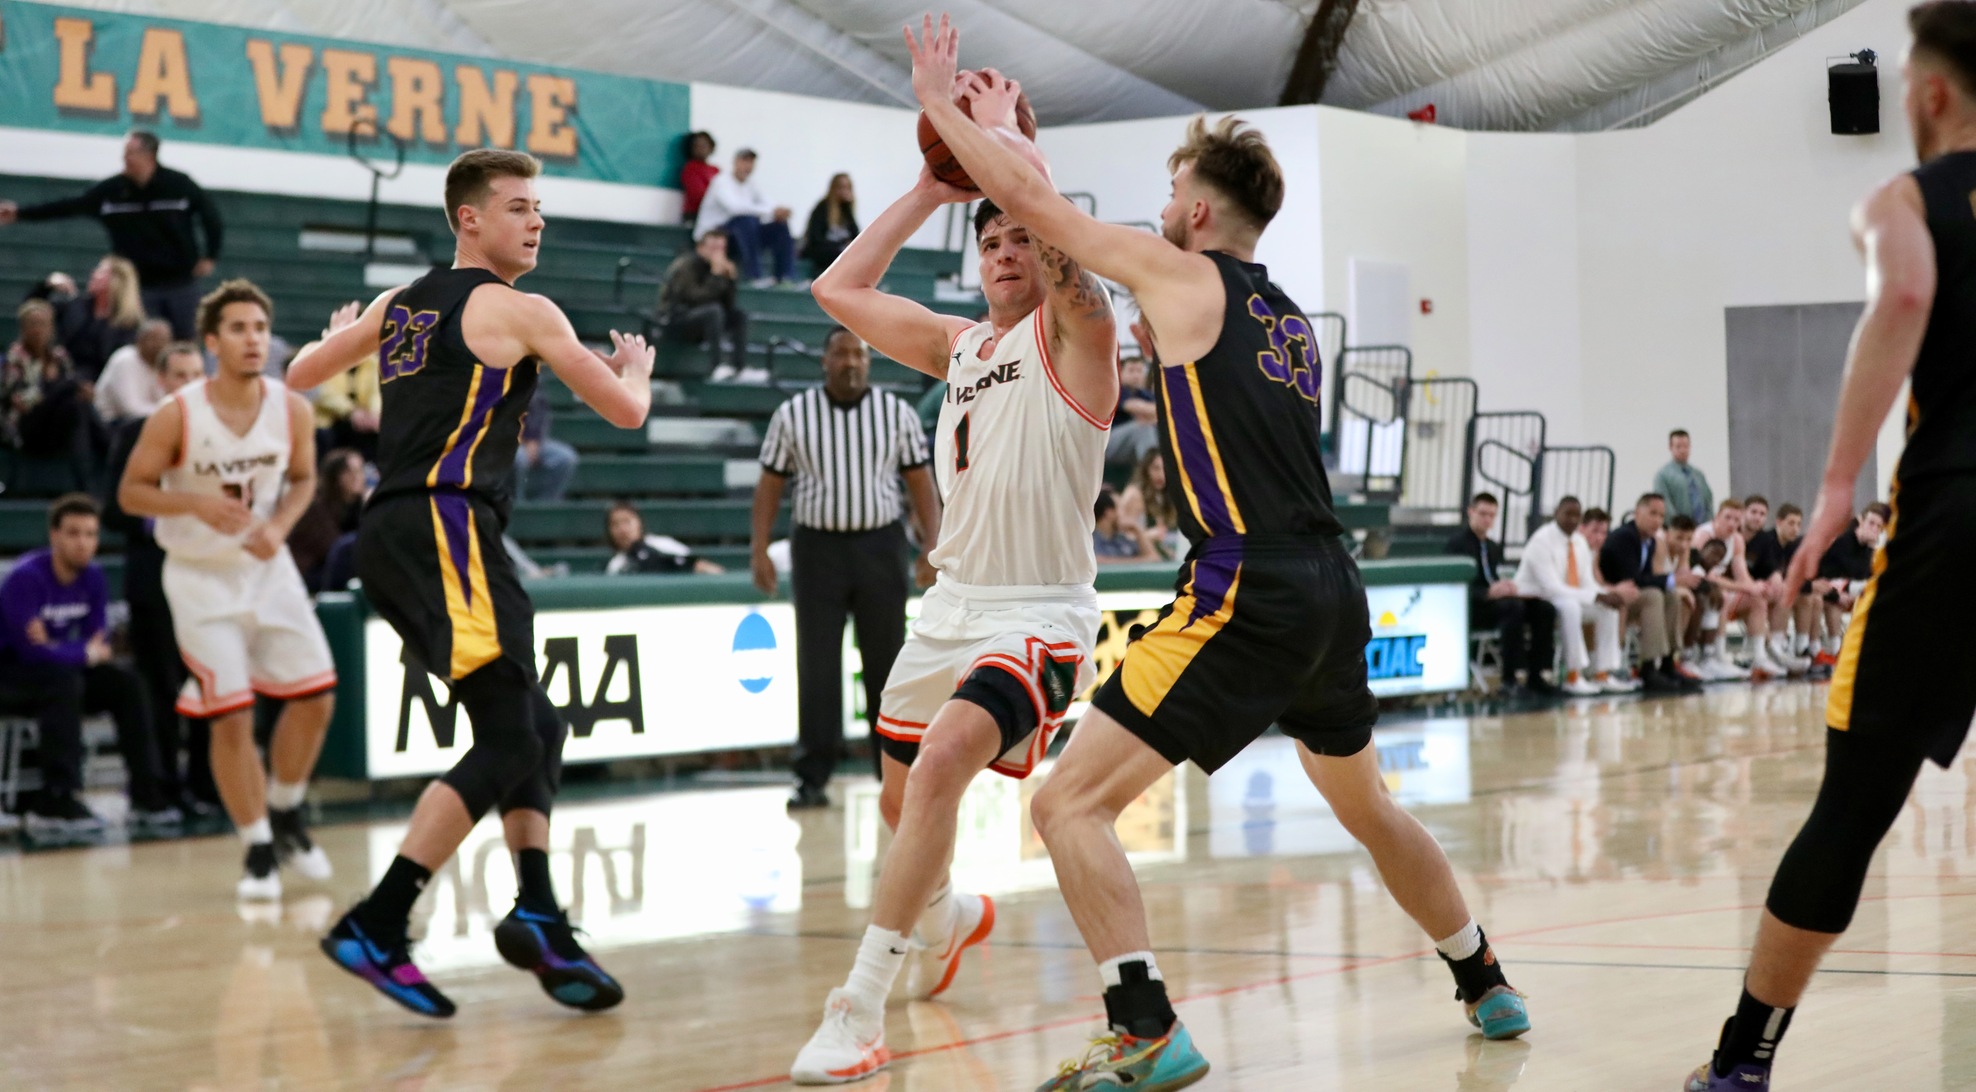 Costa scores career-high 24 points against Cal Lutheran